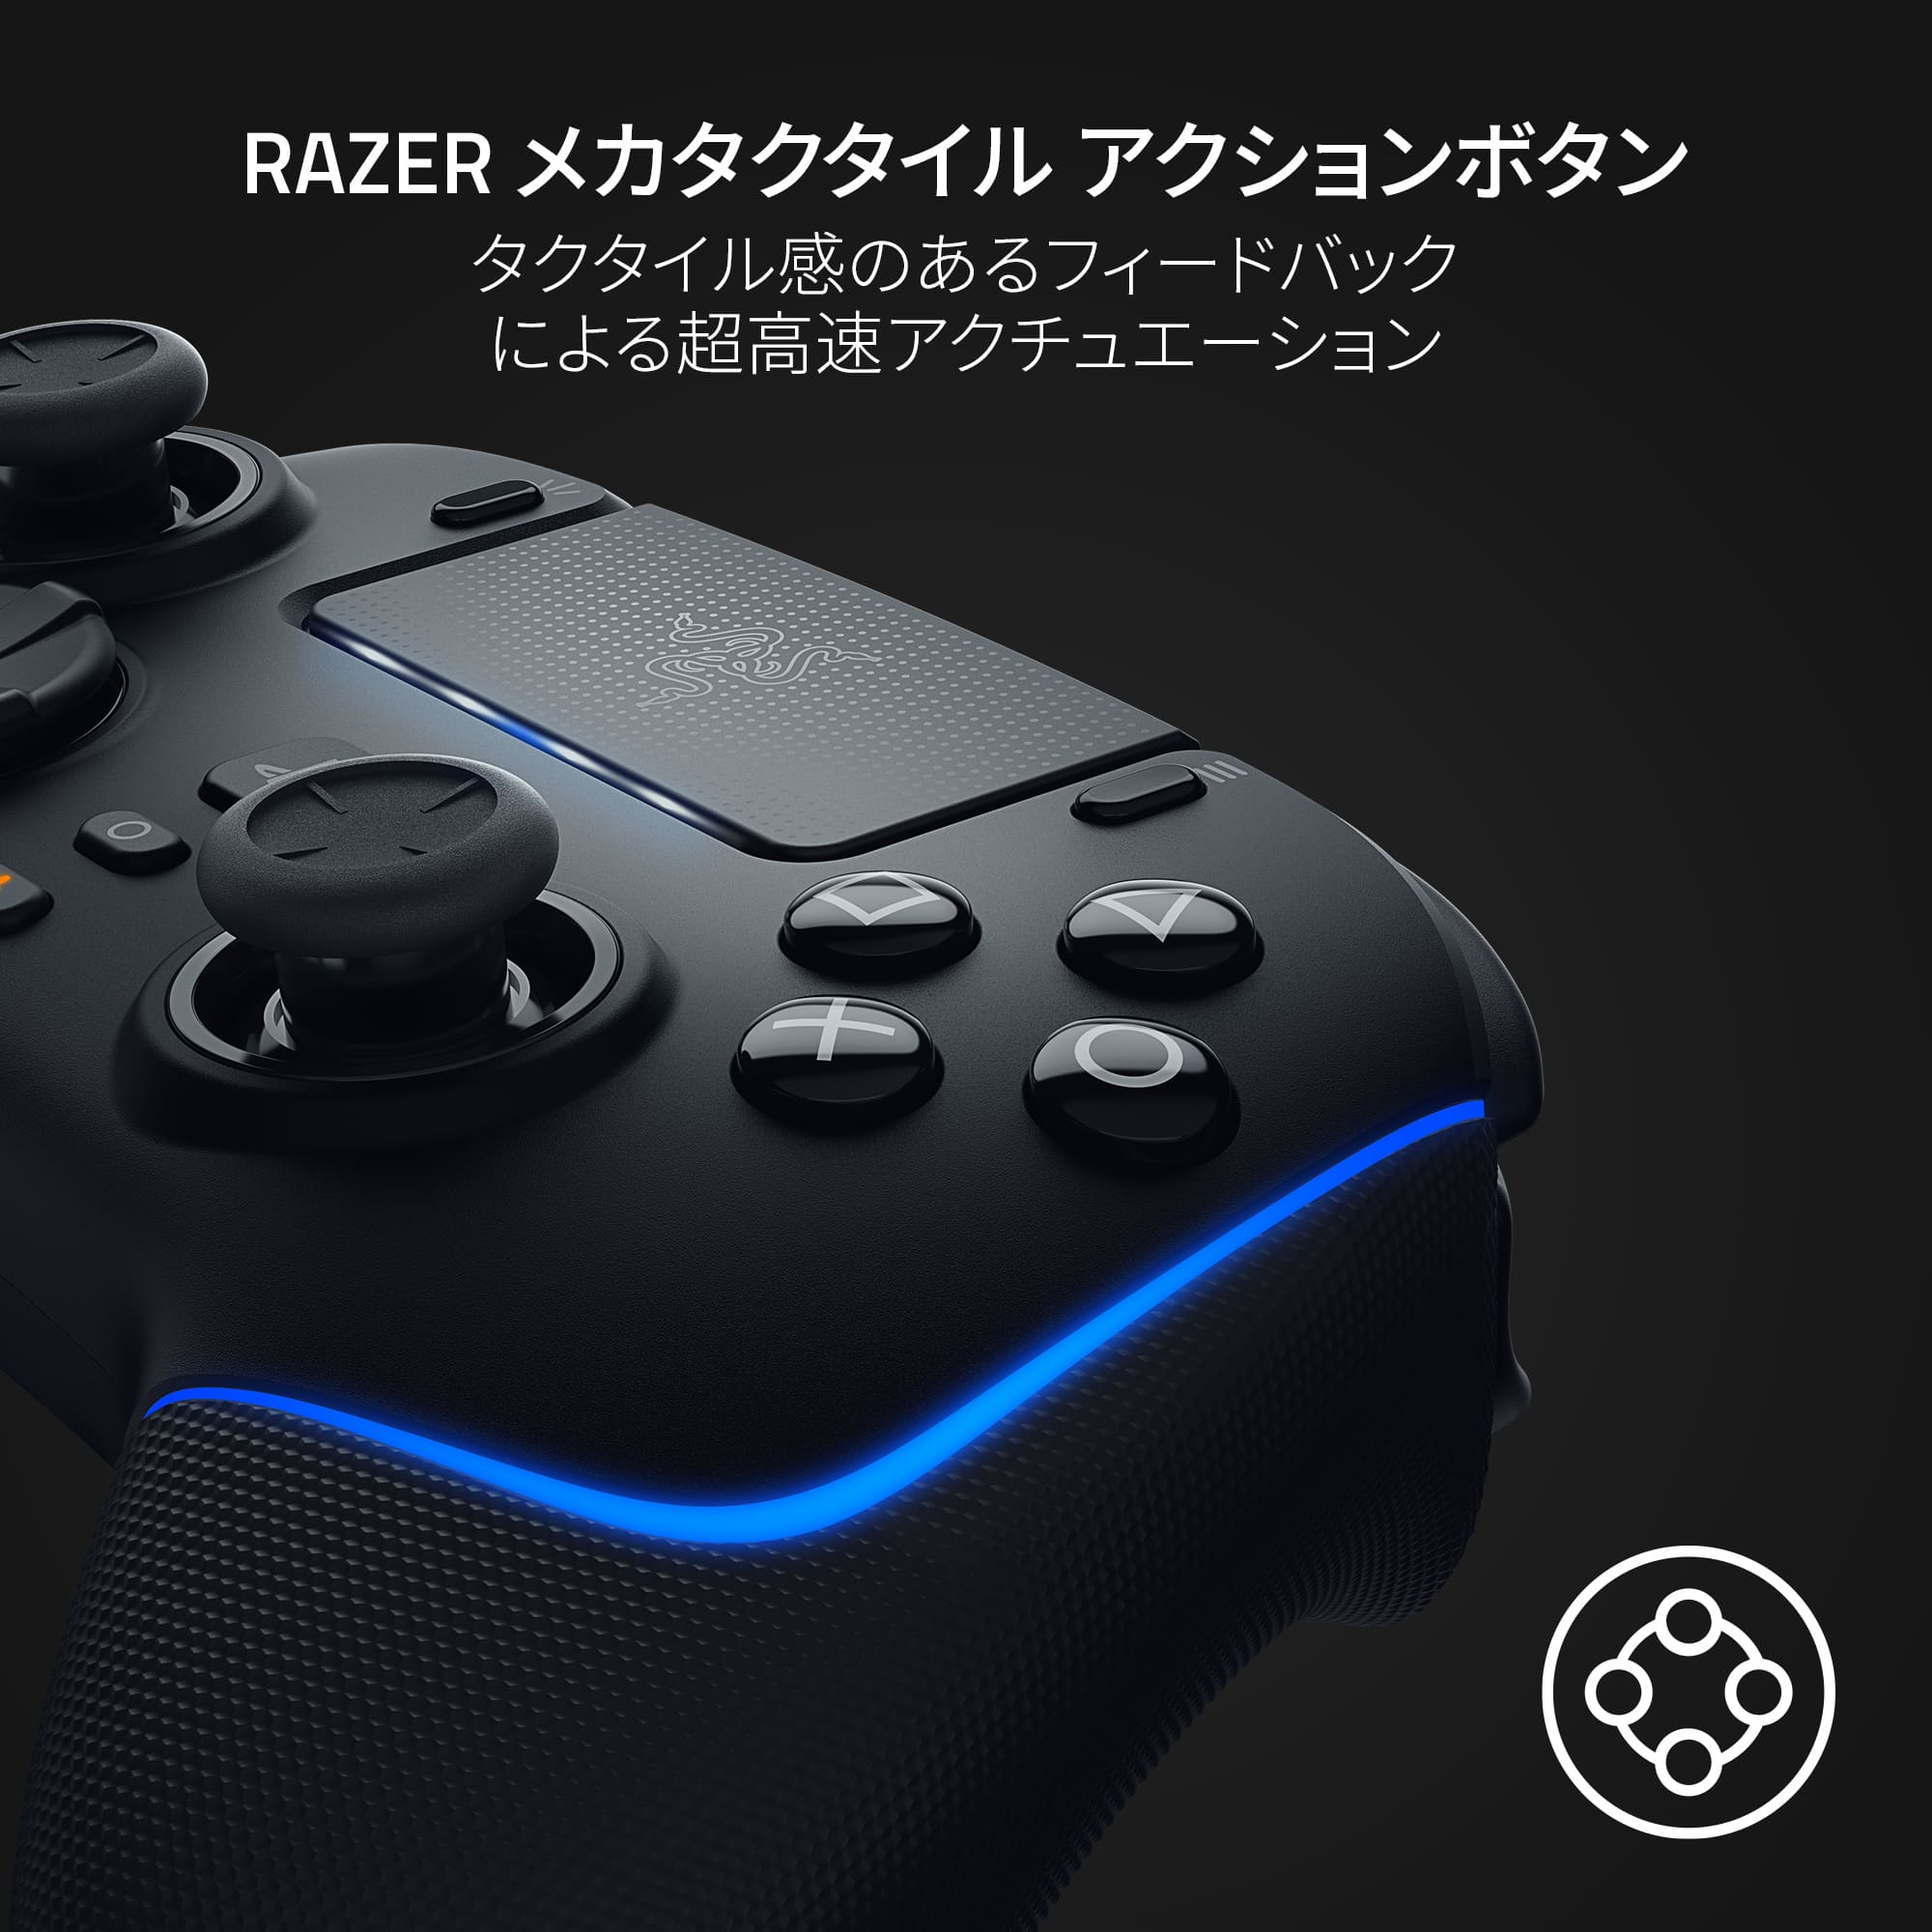 Razer Wolverine V2 Pro White Edition ウルヴァリン ブイツー プロ ホワイト | GRAPHT OFFICIAL  STORE